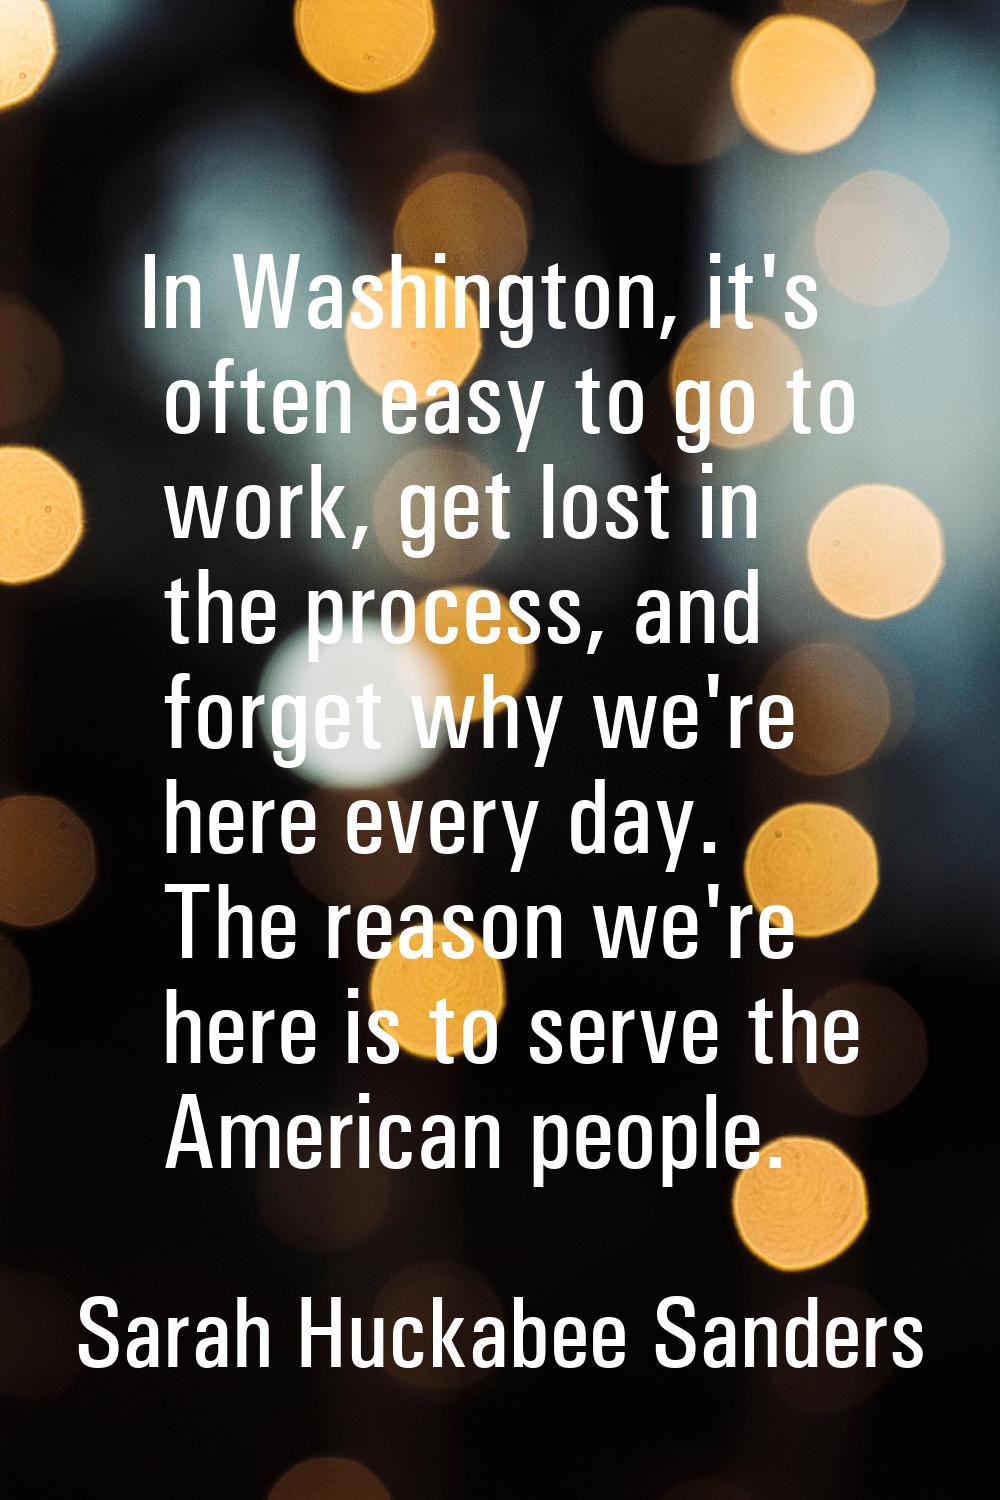 In Washington, it's often easy to go to work, get lost in the process, and forget why we're here ev